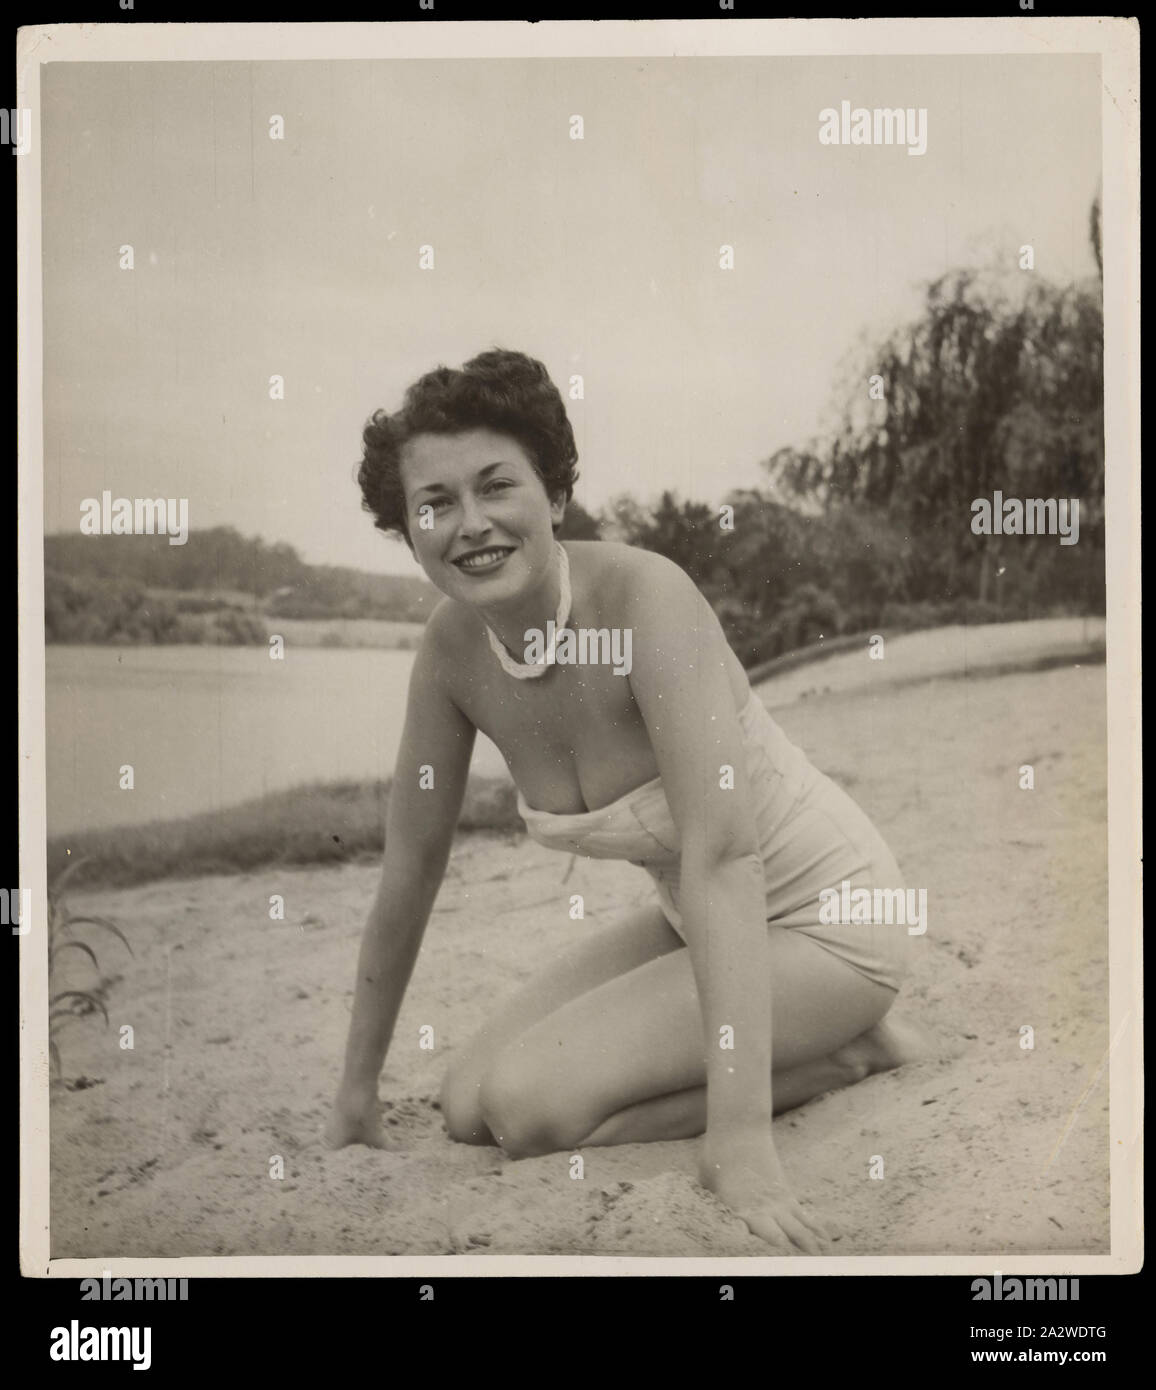 Photograph - Bernice Kopple in Swimsuit Kneeling on Beach, Hawkesbury River, Sydney, Australia, Nov 1953, Photograph of Bernice Kopple in a light-coloured one-piece, strapless swimsuit, kneeling and leaning forward with hands on the sand, on the beach at Hawkesbury River, Sydney, Australia, Nov1953, In the 1950s and 1960s Bernice Kopple worked as a fashion photographic model and as a performer on the Tivoli Circuit. Bernice Kopple was born in Glasgow, Scotland in 1930 and migrated to Melbourne Stock Photo